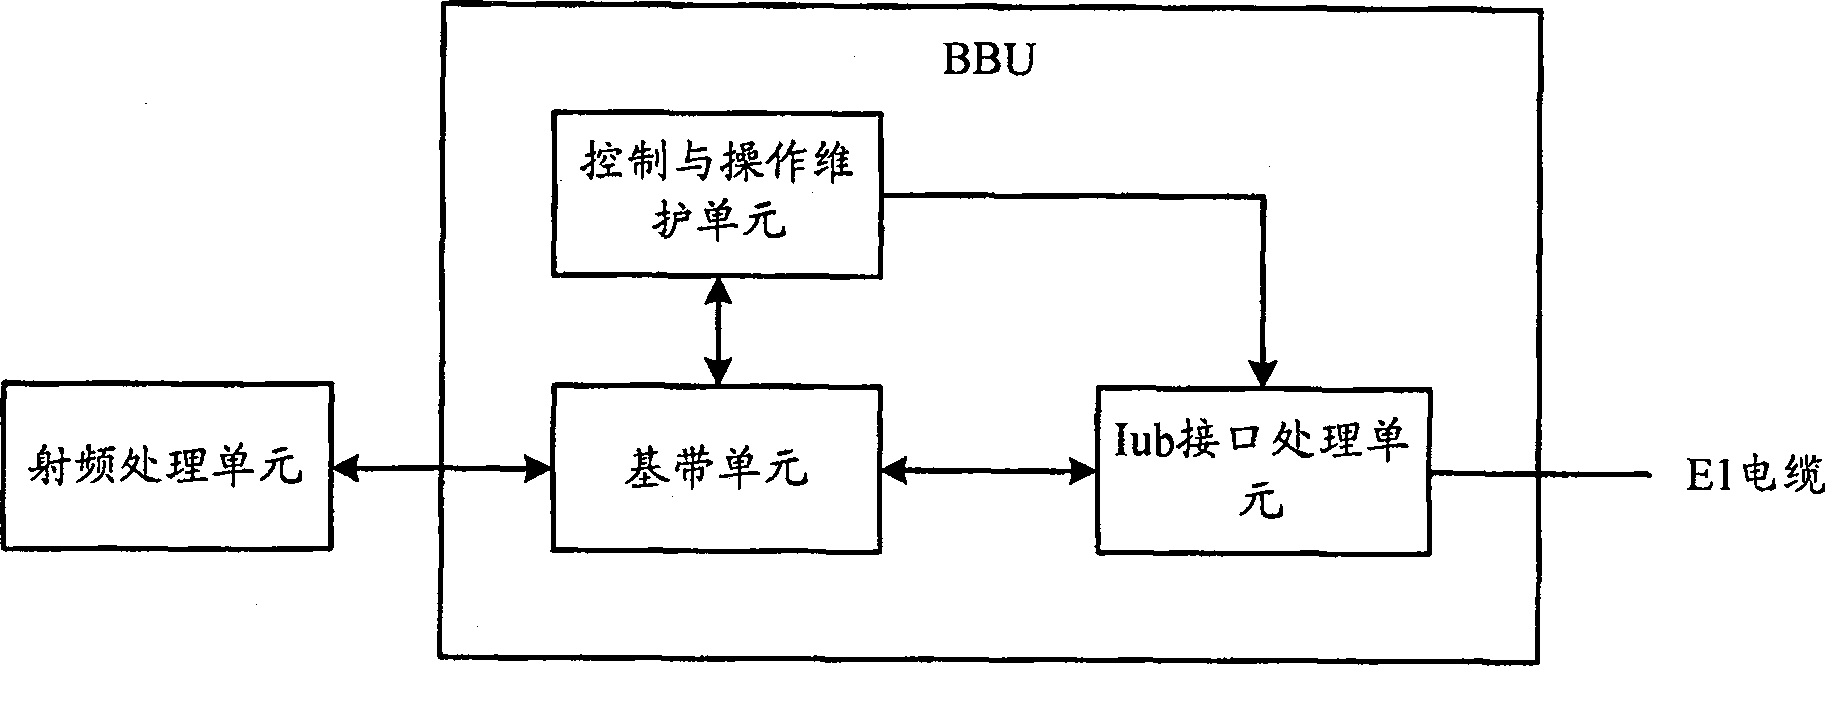 Transmission control method for wireless network and base station